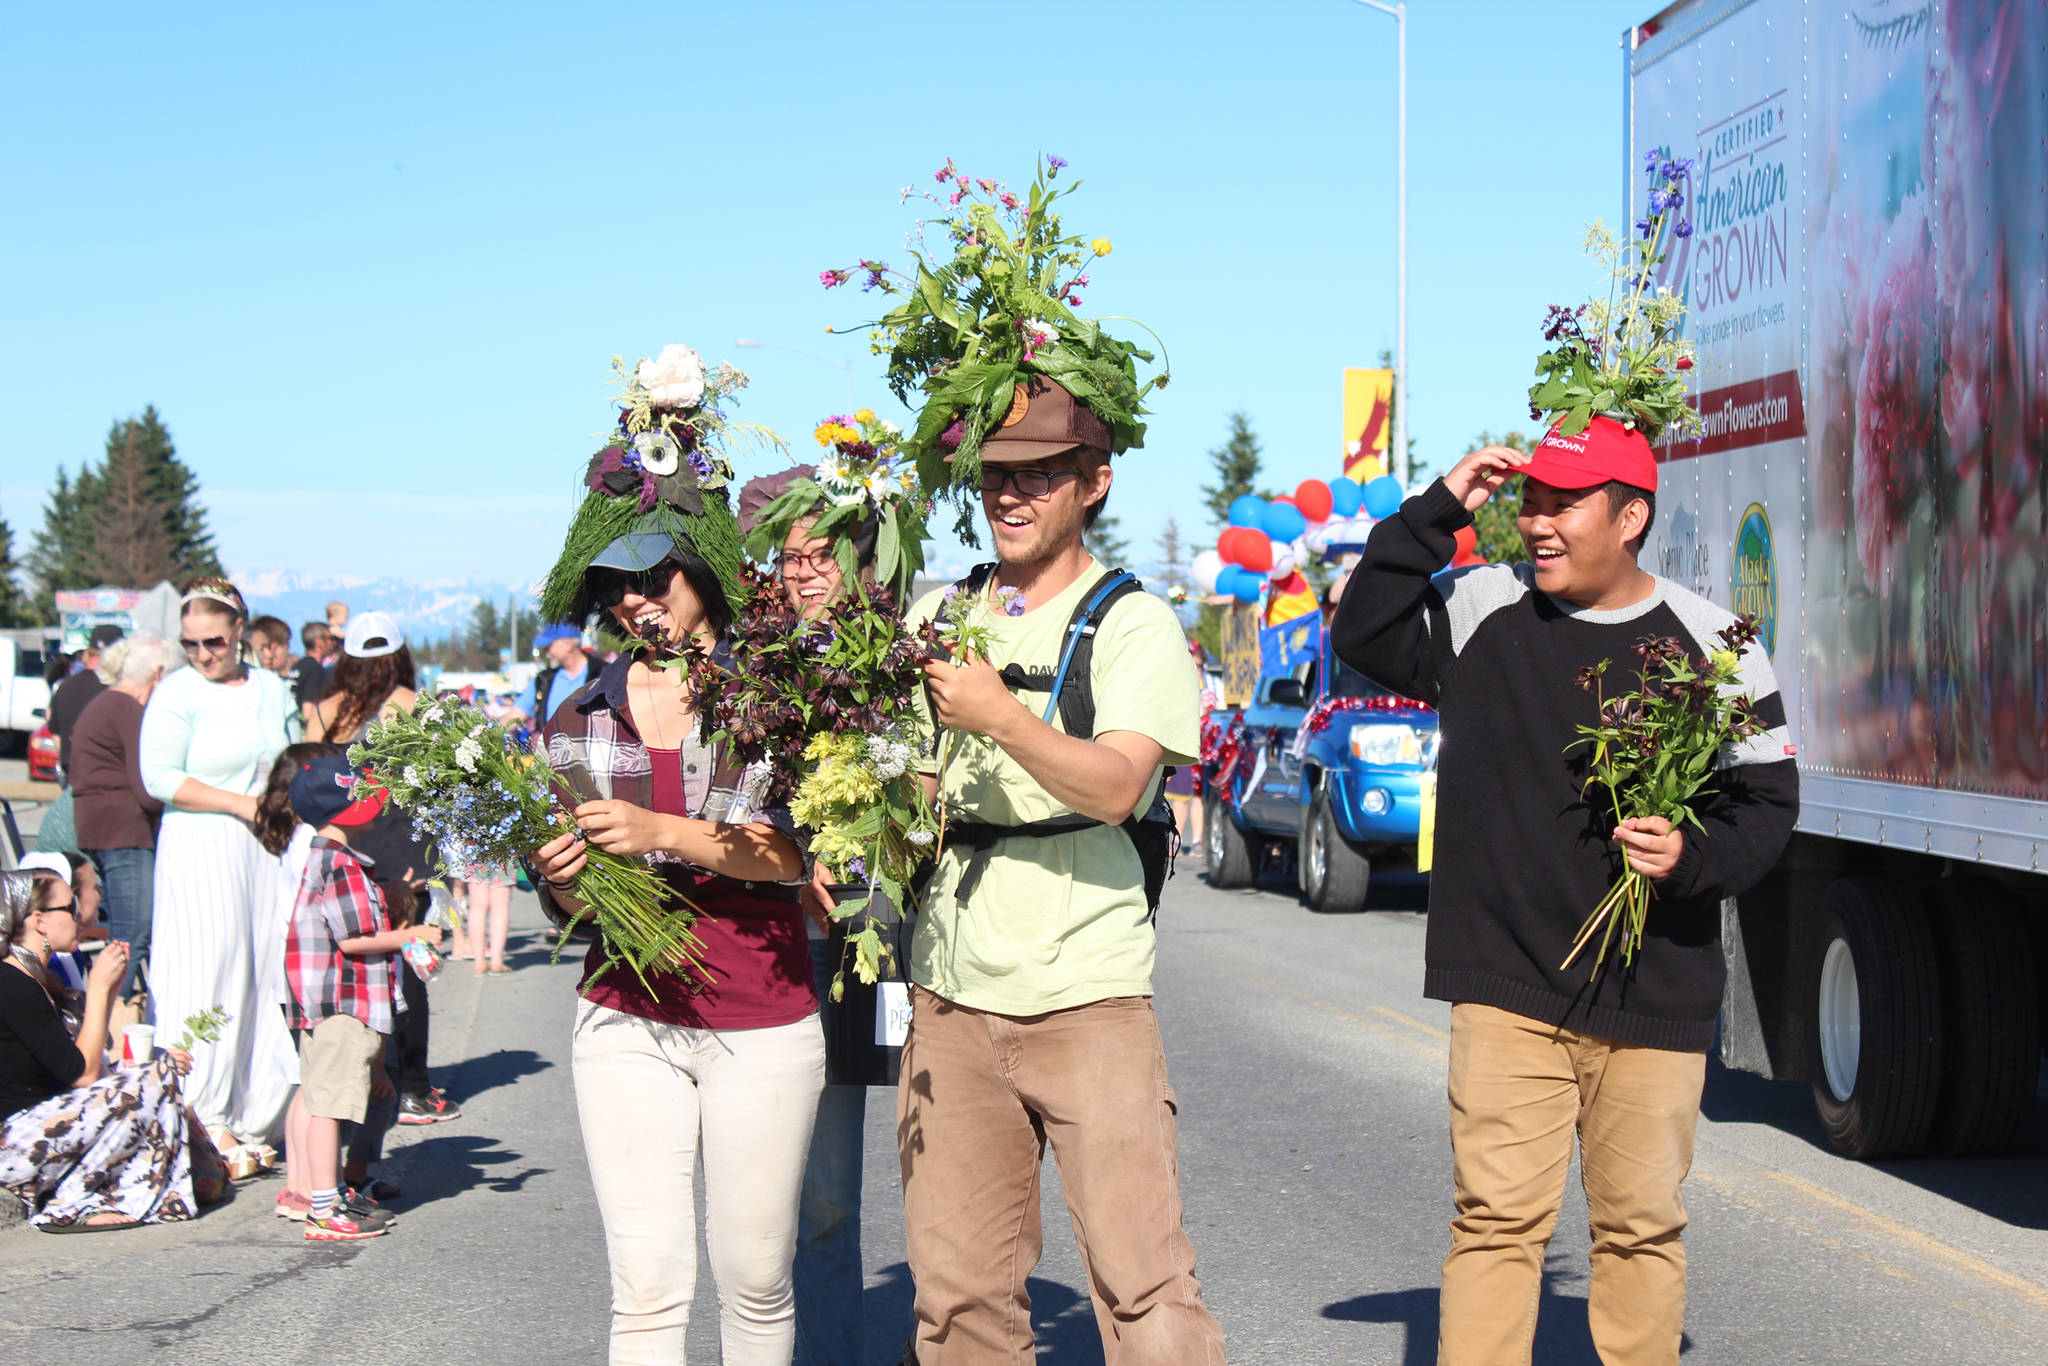 Parade participants marching with a Certified American Grown truck pass out fresh blooms to families lining Pioneer Avenue during the annual Independence Day parade Wednesday, July 4, 2018 in Homer, Alaska. (Photo by Megan Pacer/Homer News)